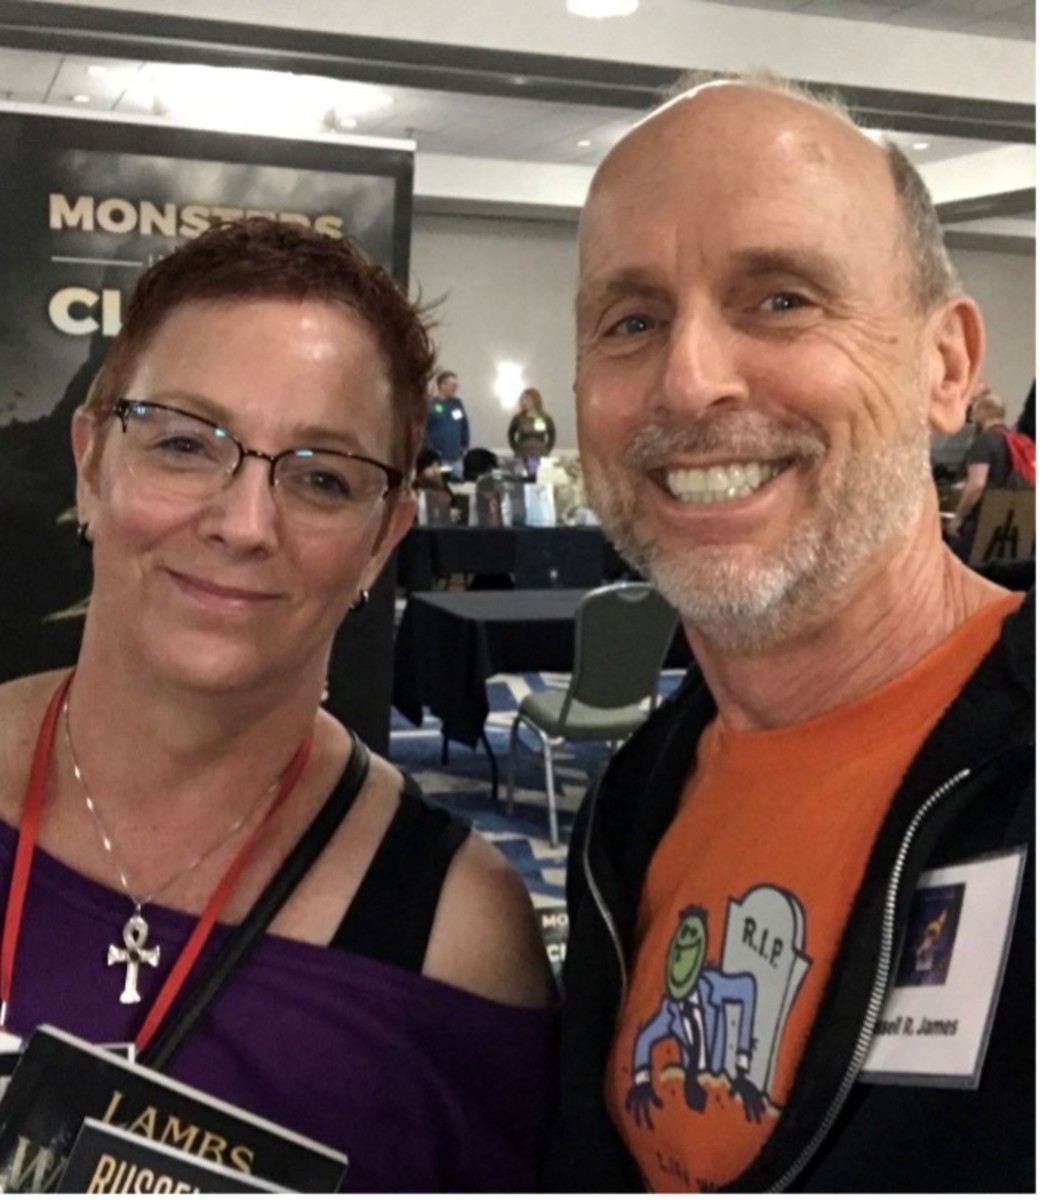 Convention-al Wisdom: Why I Love Attending Cons as a Writer